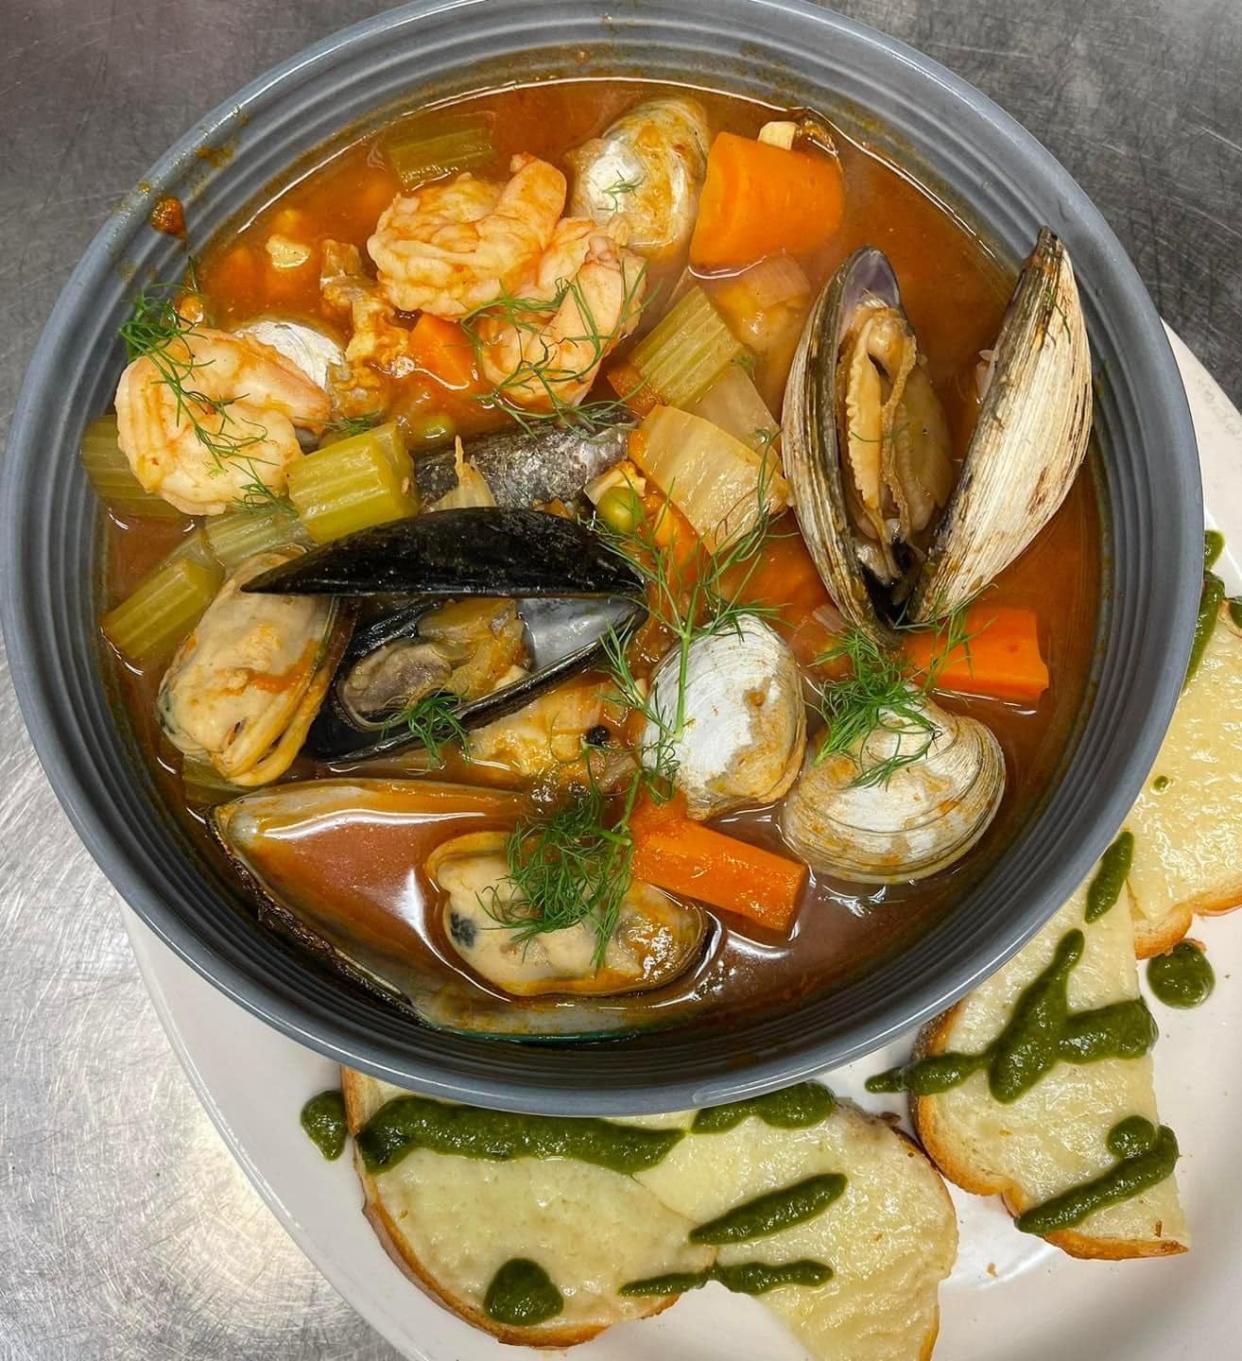 You can get a preview of dishes that may appear on the Basil's Coastal Italian menu at the Lake Park Steakhouse in Carolina Beach. Like this cioppino.